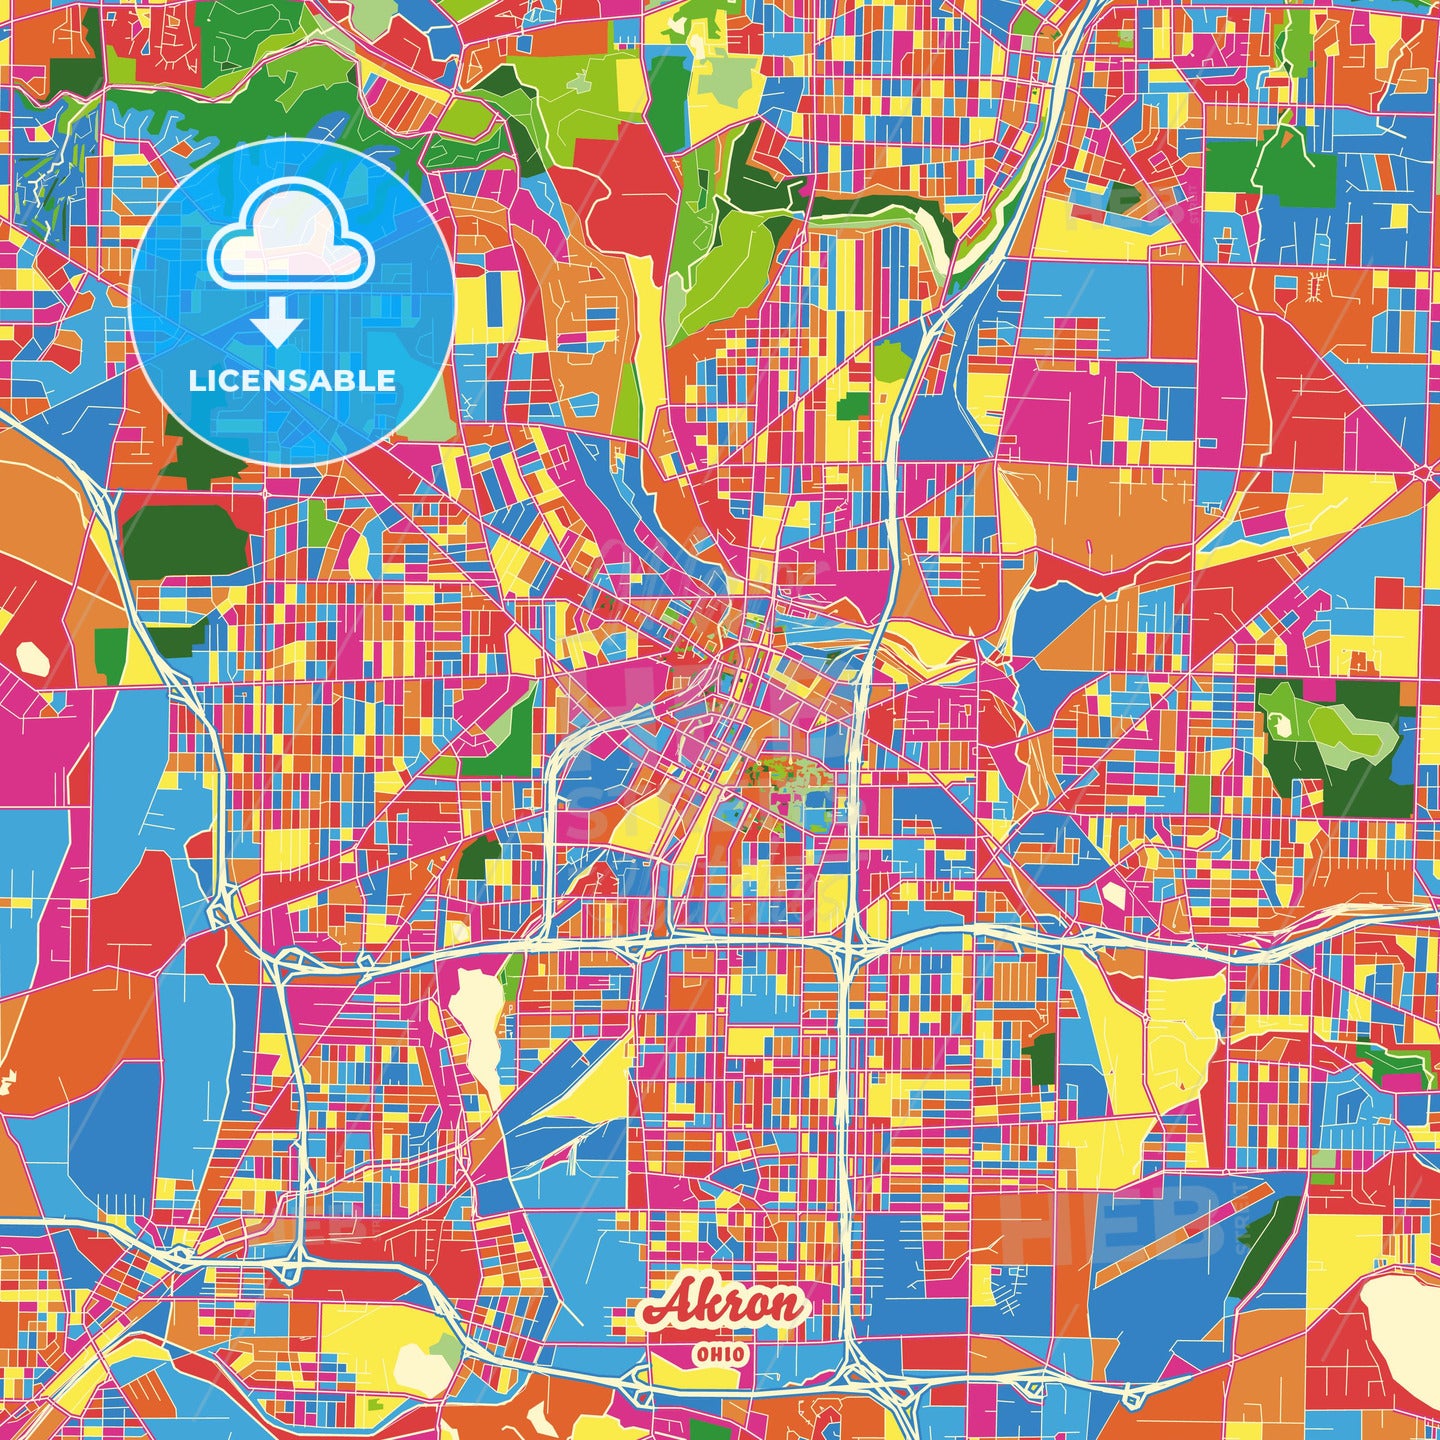 Akron, United States Crazy Colorful Street Map Poster Template - HEBSTREITS Sketches